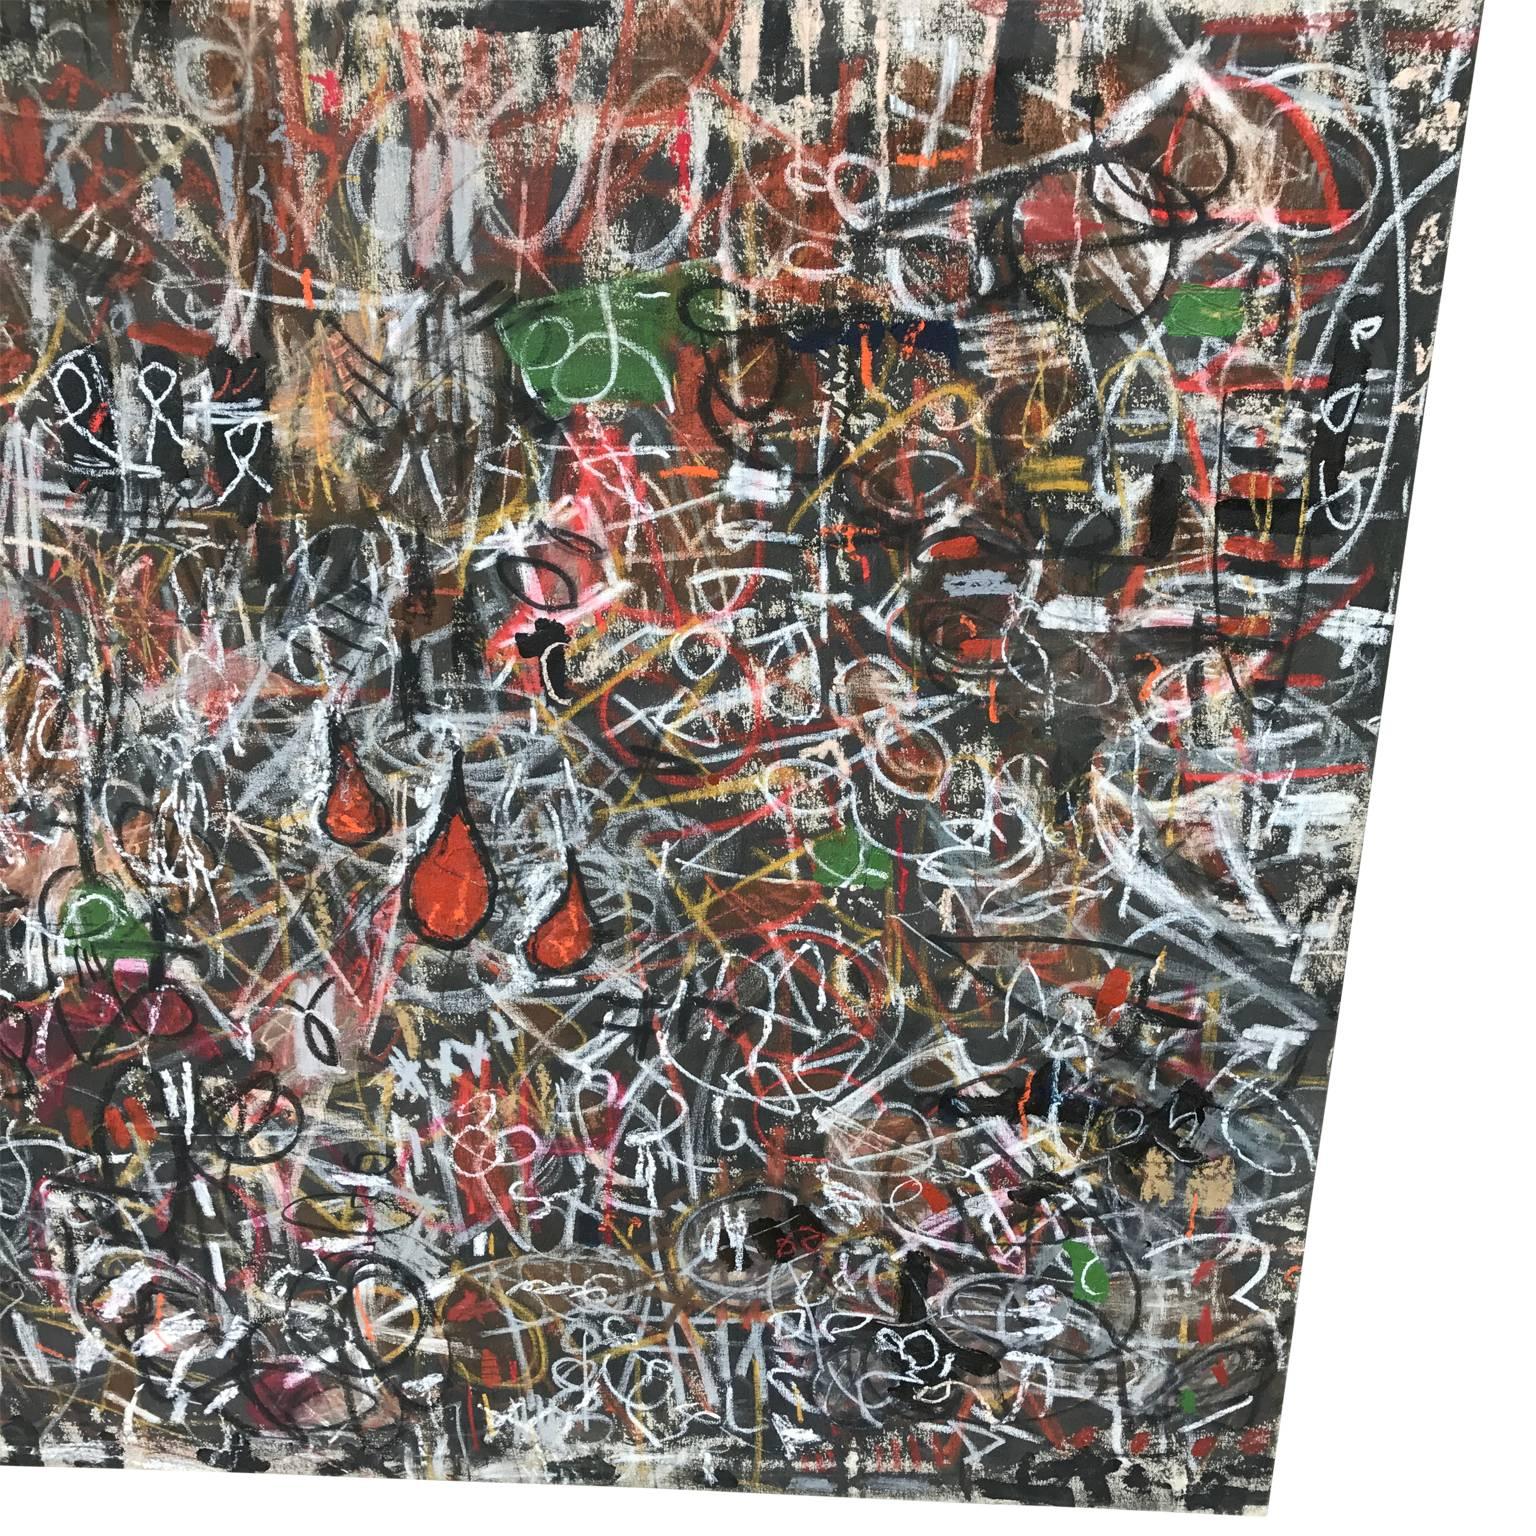 Large horizontal modern abstract multimedia painting by Gronk. 
Gronk is the pseudonym of Chicano painter, printmaker, and performance artist Glugio Nicandro. 
His work is collected by museums around the country including the Smithsonian American